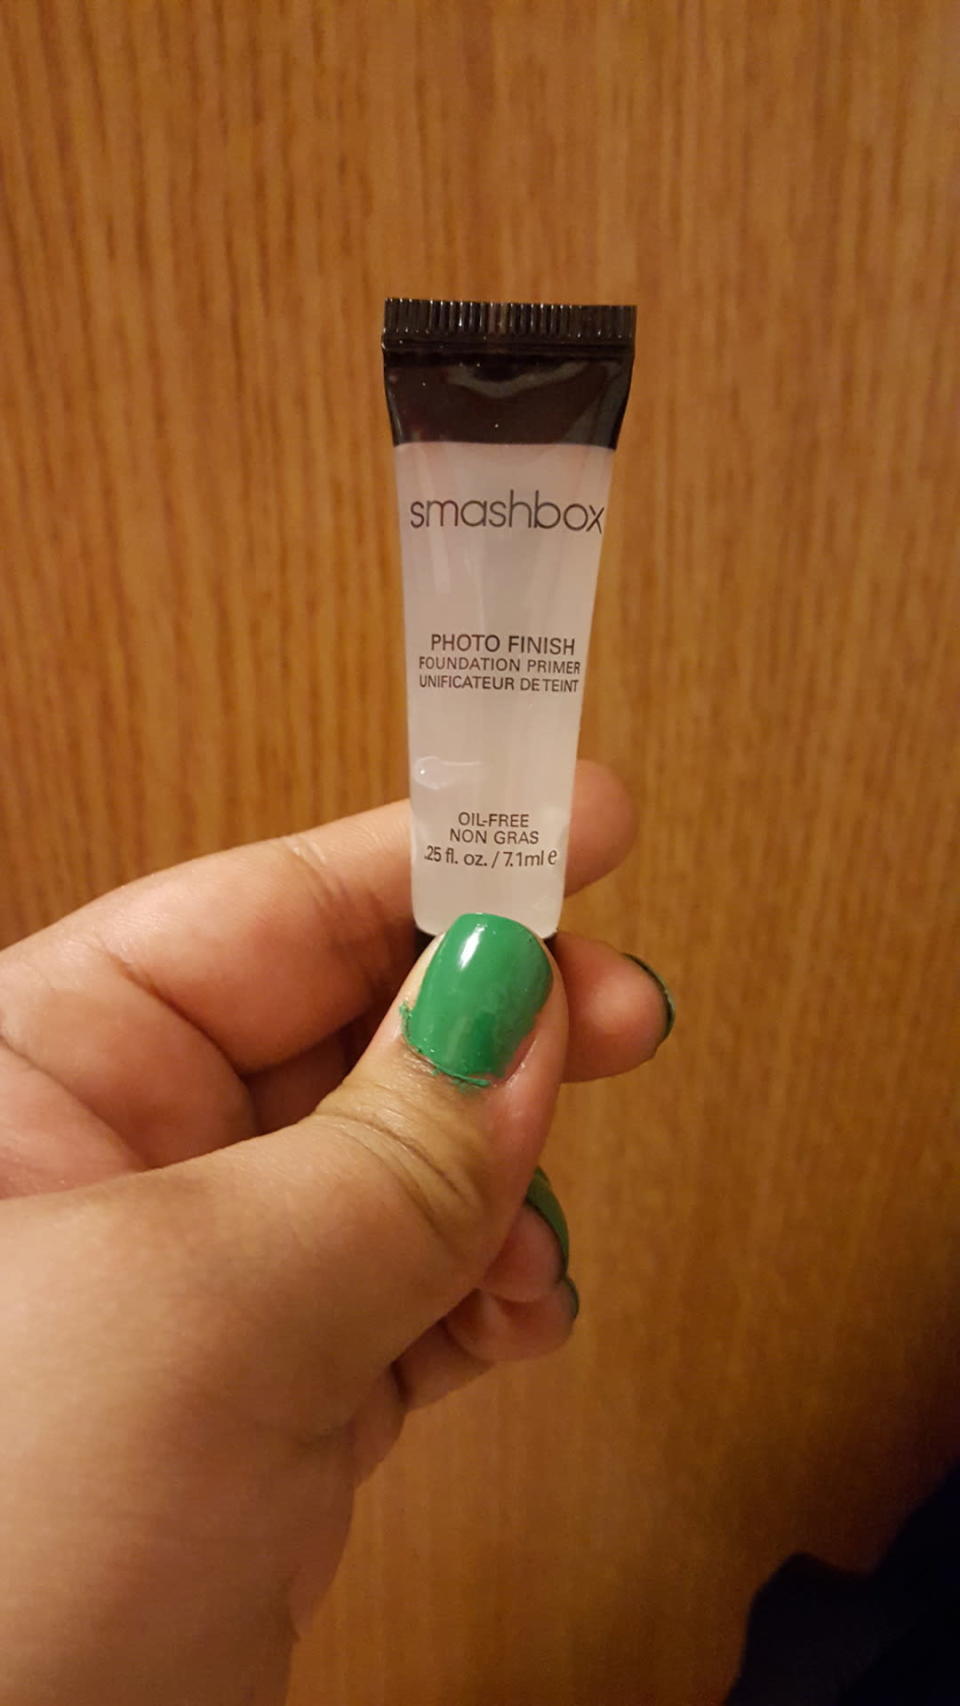 Smashbox, Photo Finish Classic Primer: This primer did a great job when I first applied it and made my foundation look lovely, but by 3pm I noticed my skin’s problem spots were starting to show through my makeup.  For me, this is just an alright product and something I might throw in my makeup bag for travel due to its size.